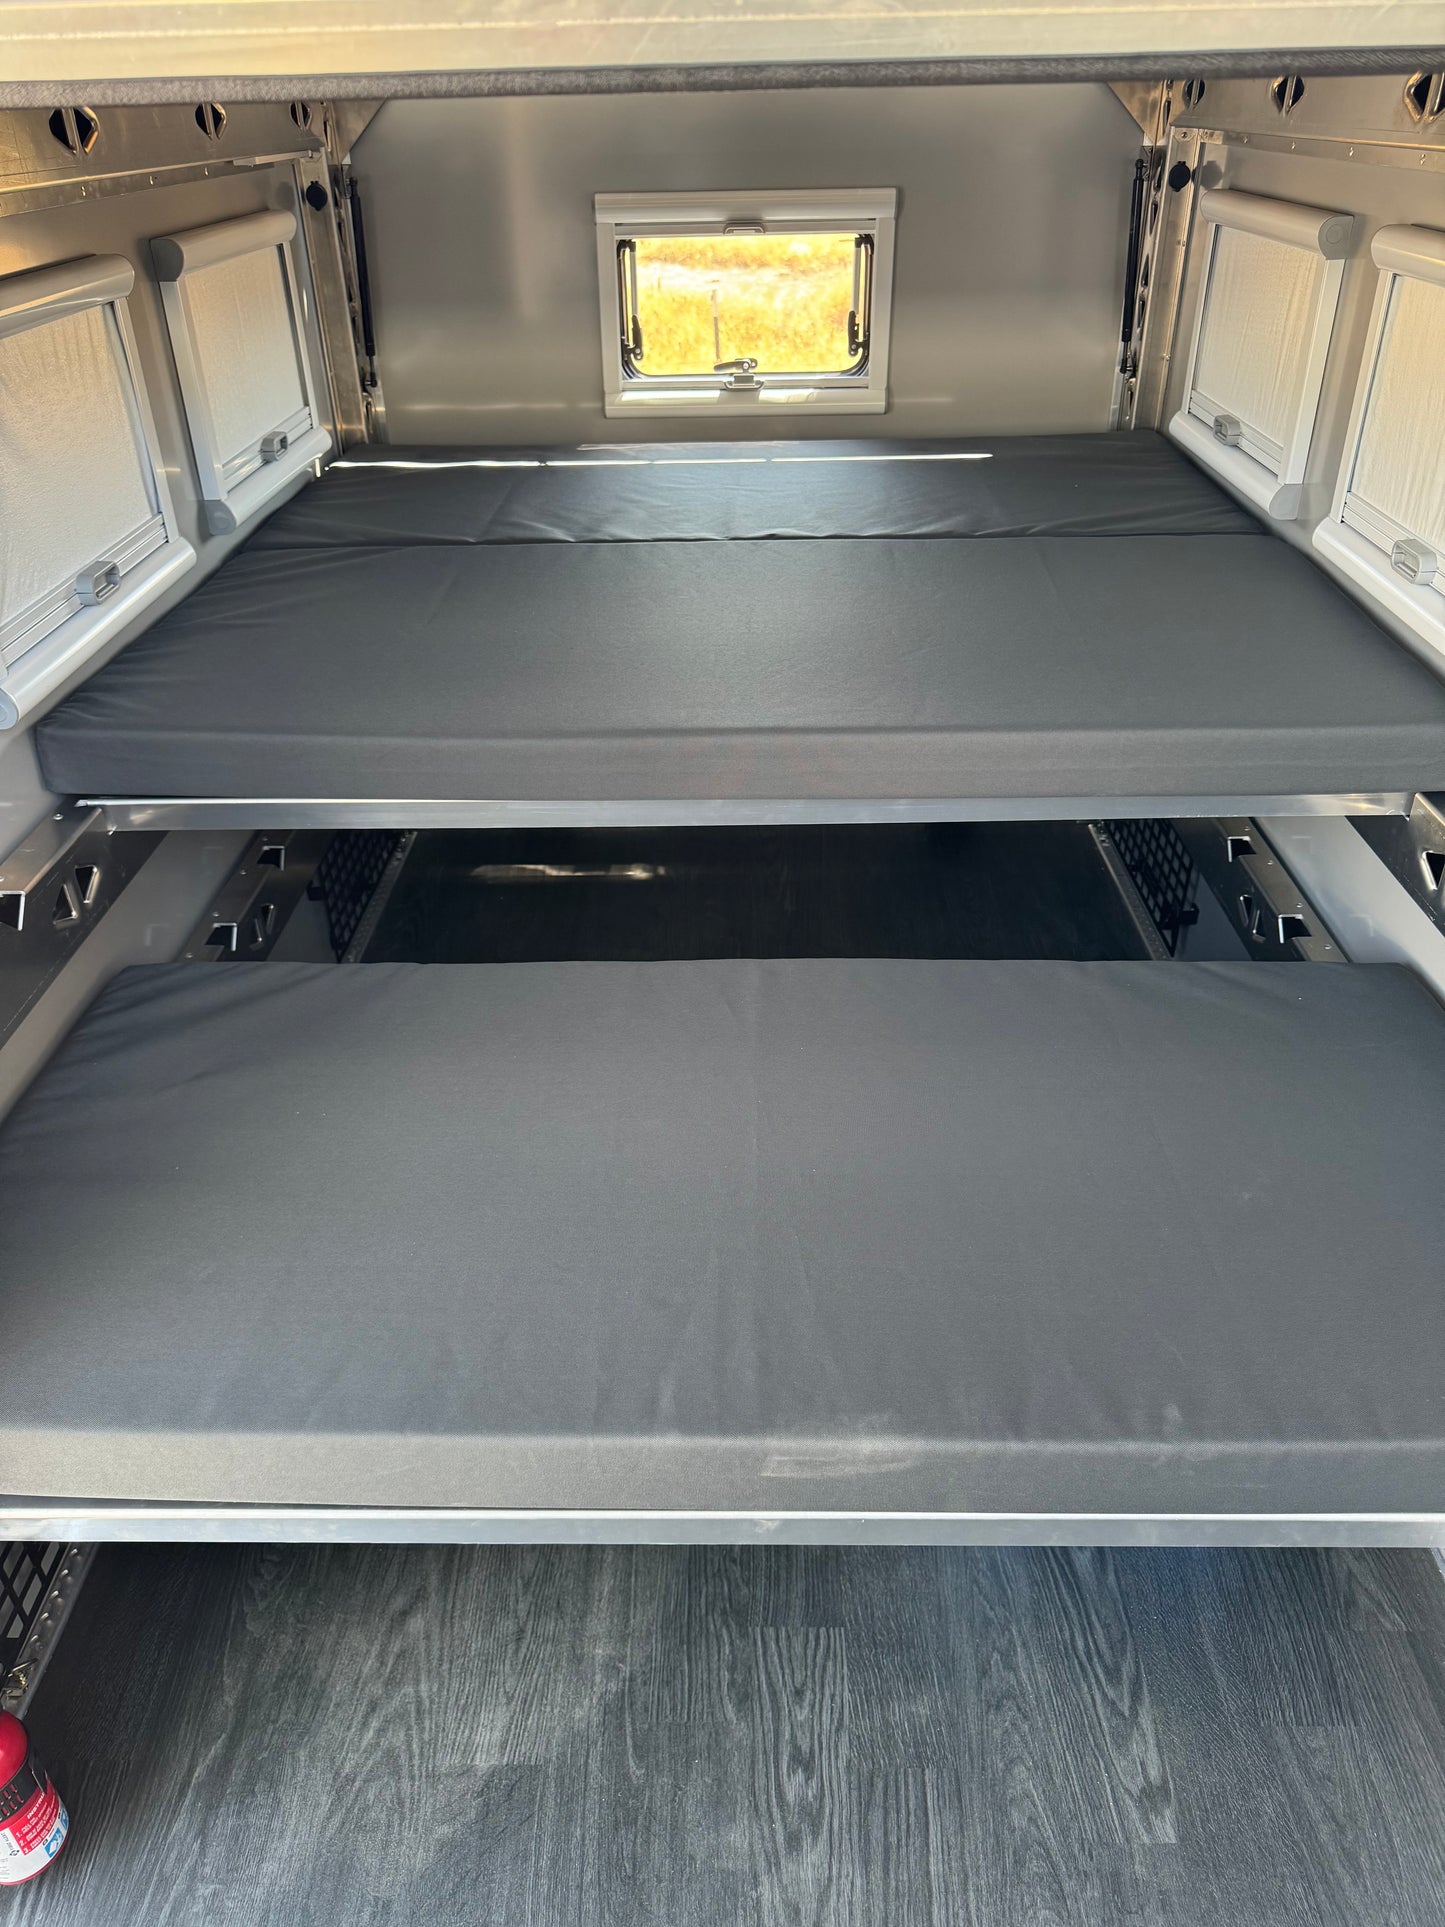 Additional Complete 3 Panel Bed Kit